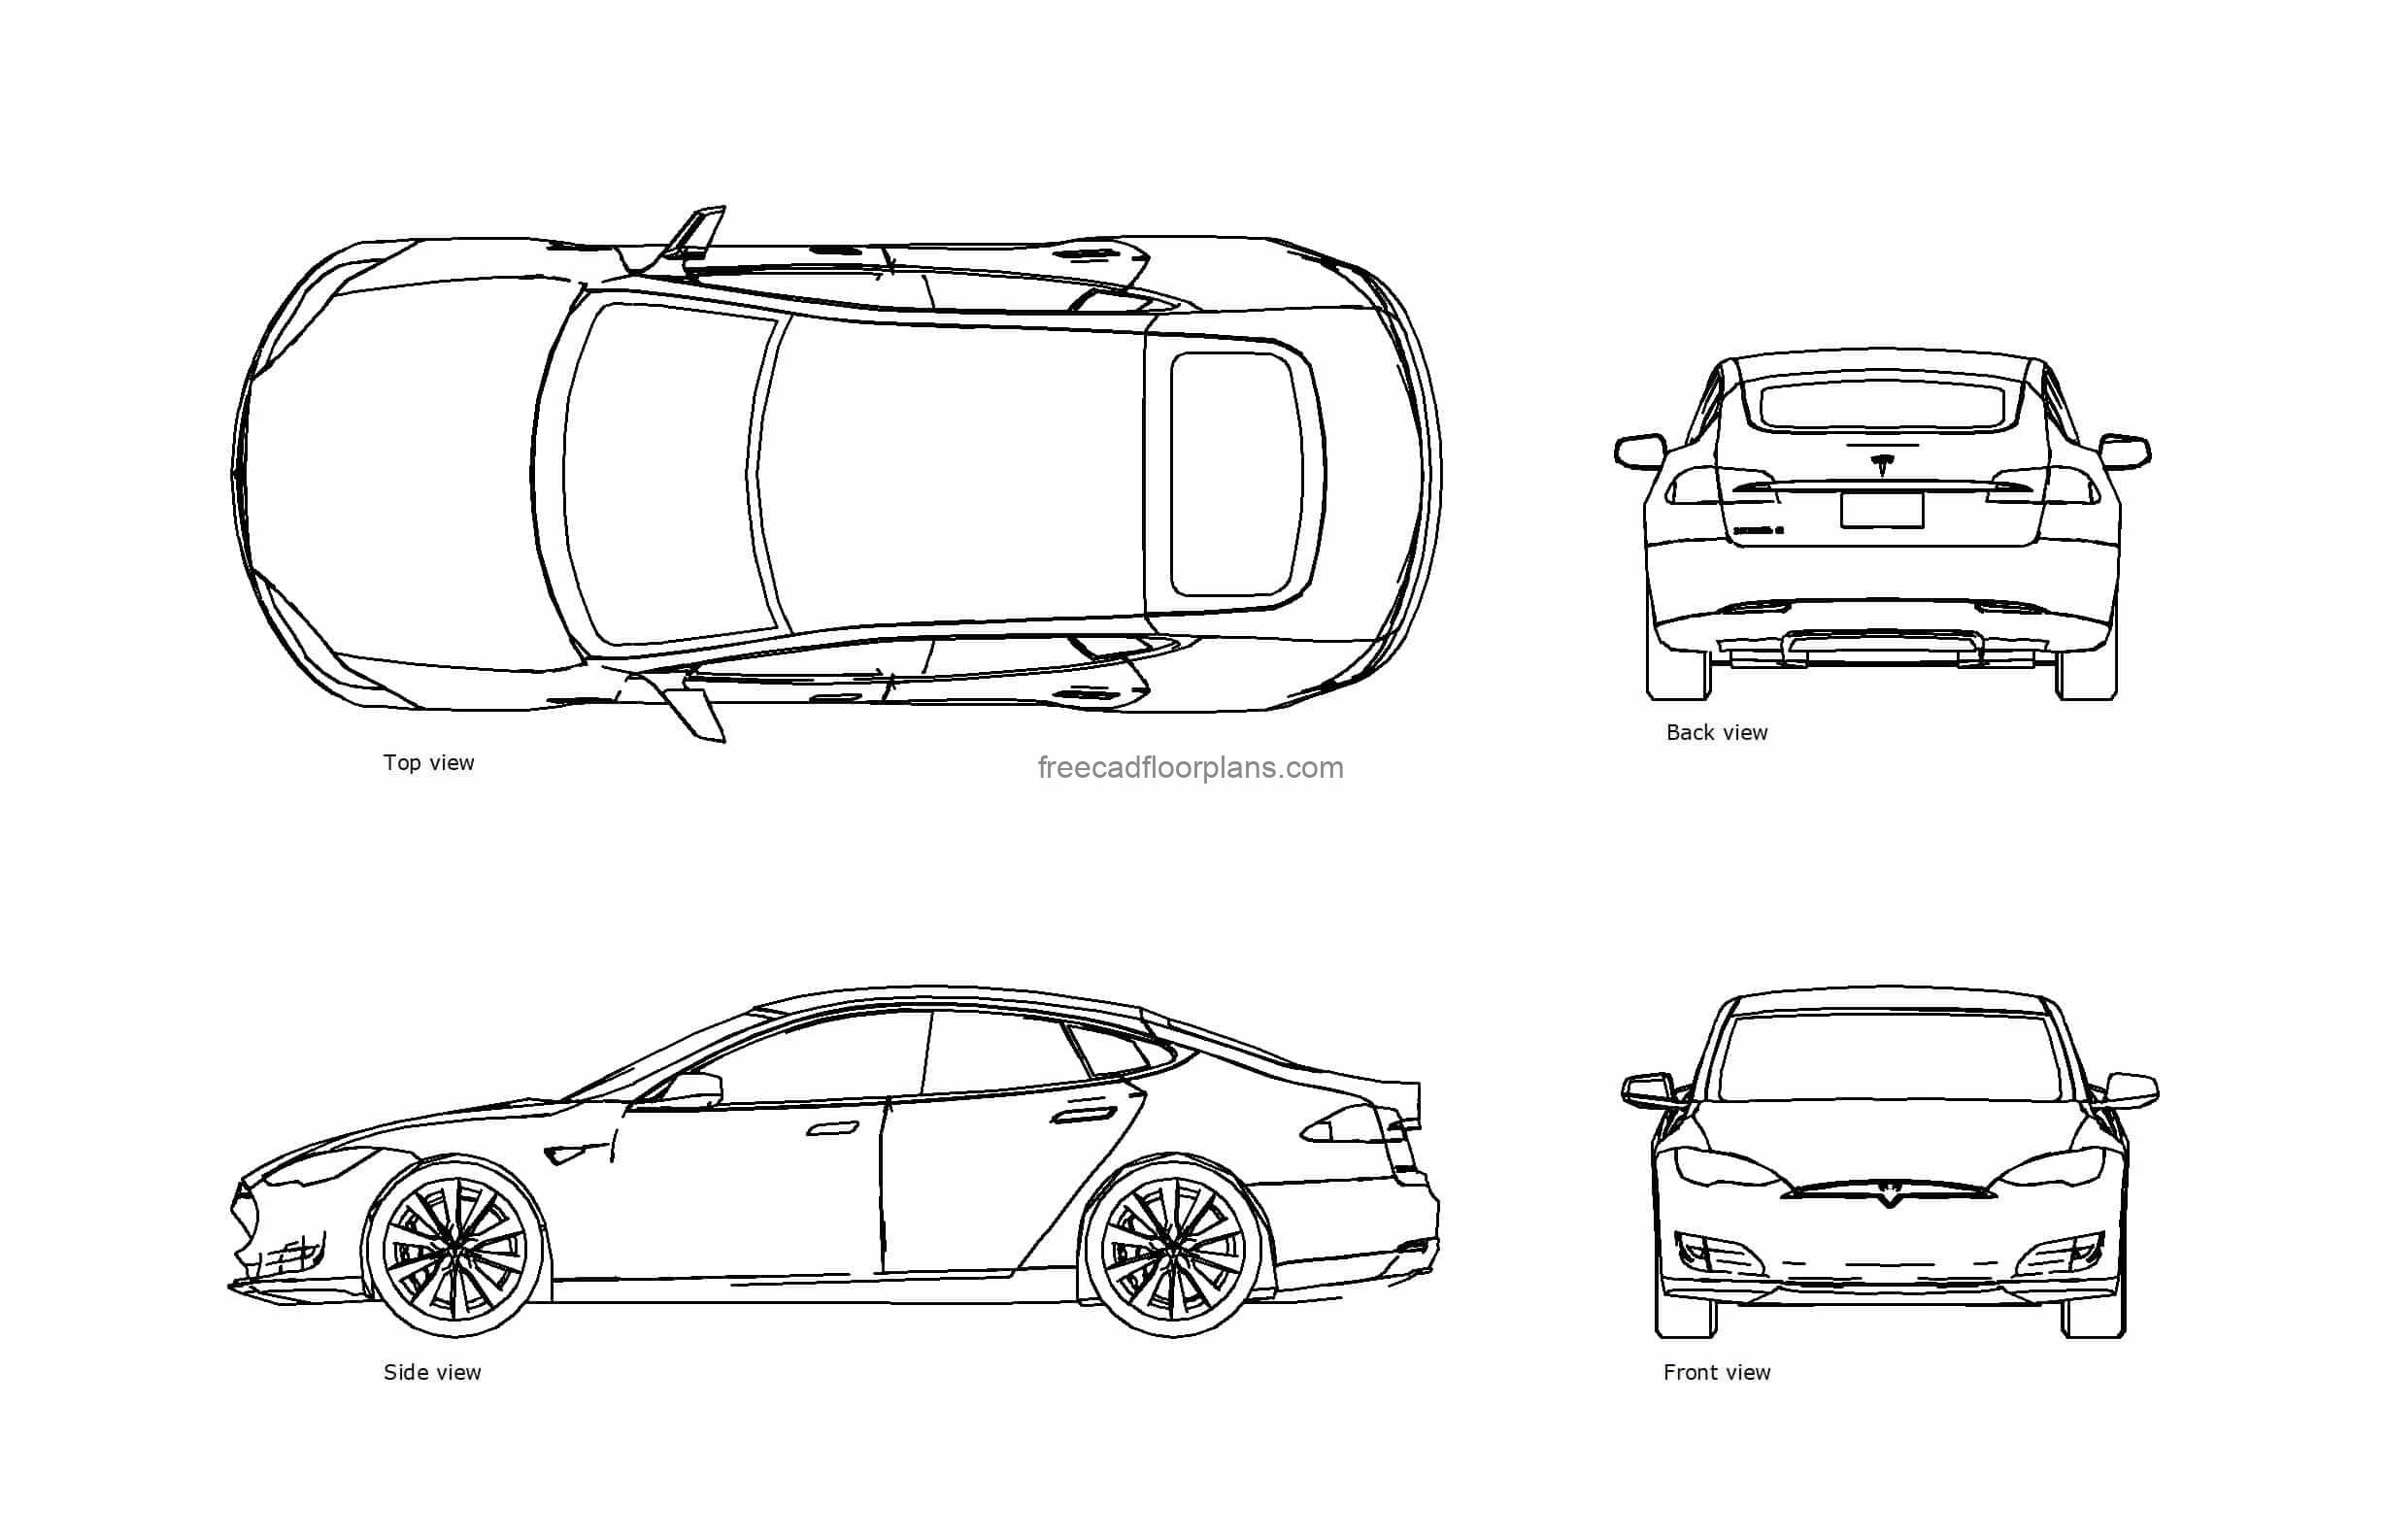 autocad drawing of a tesla model s, plan and elevation 2d views, dwg file free for download